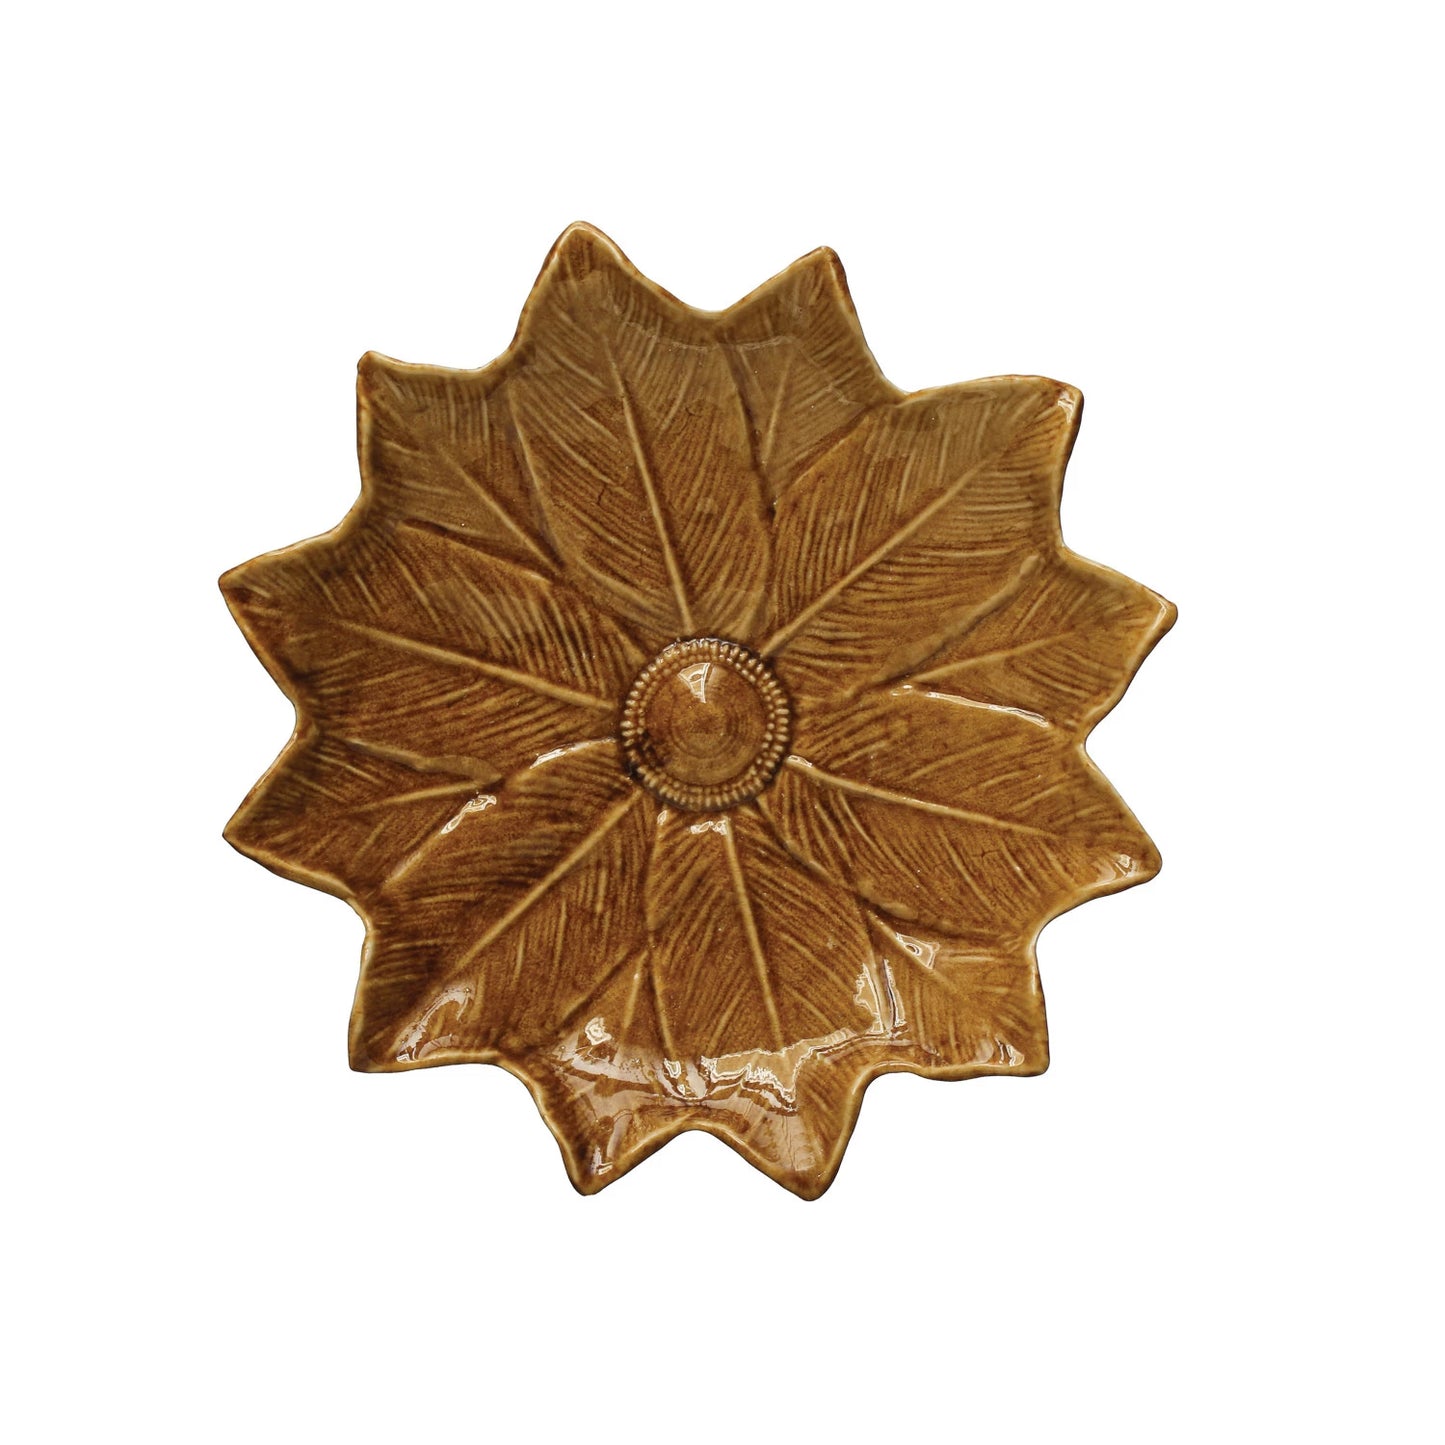 top view of the large stoneware flower plate displayed on a white background